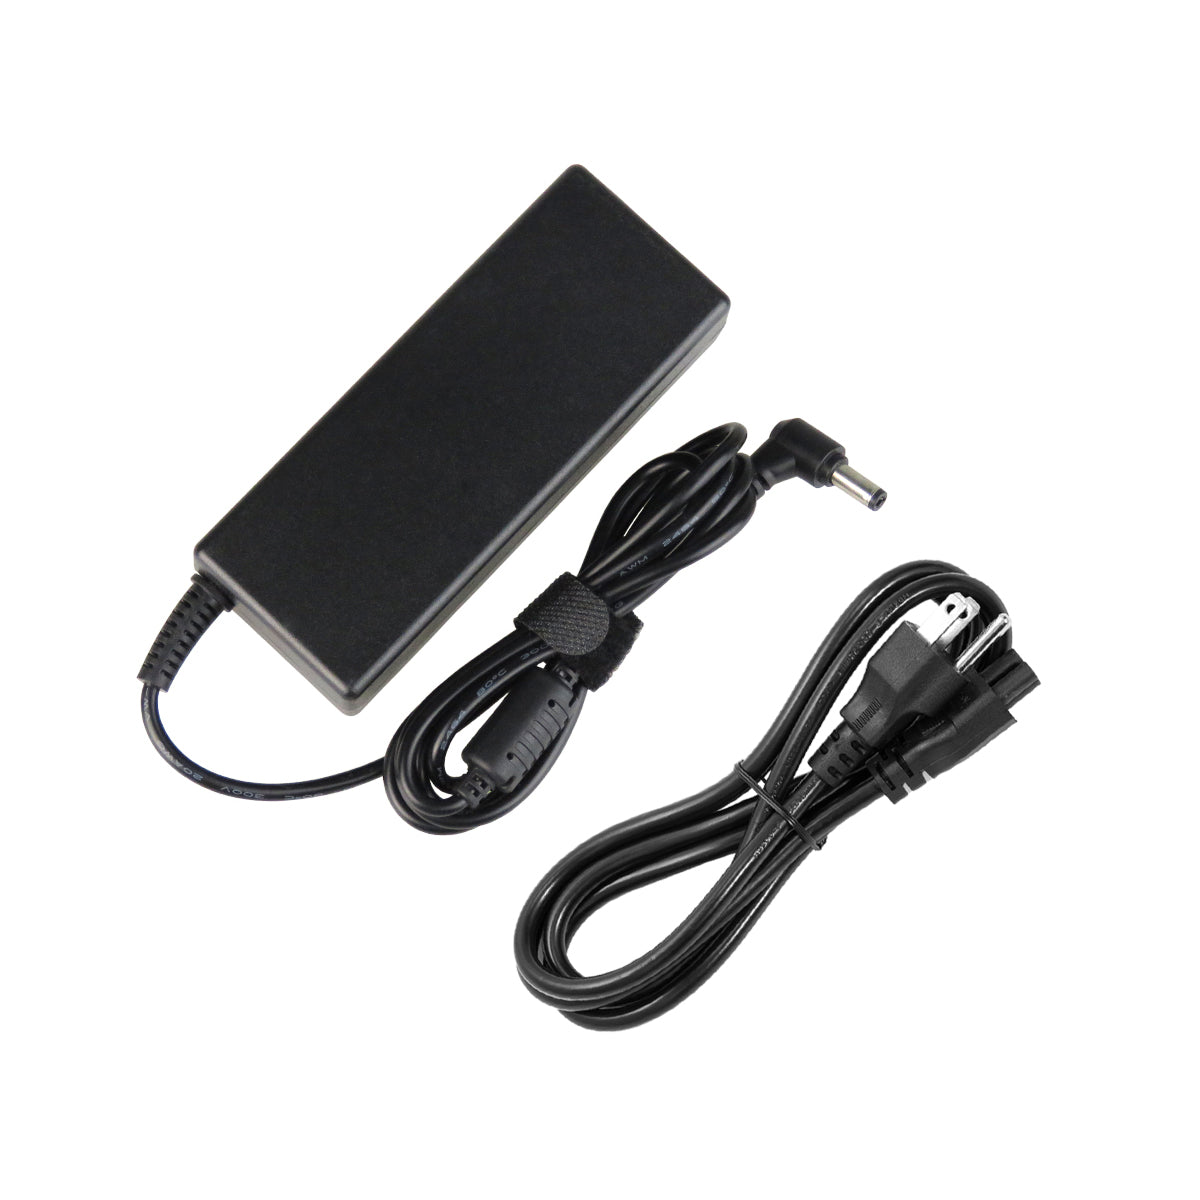 AC Adapter Charger for ASUS K75DE Notebook.